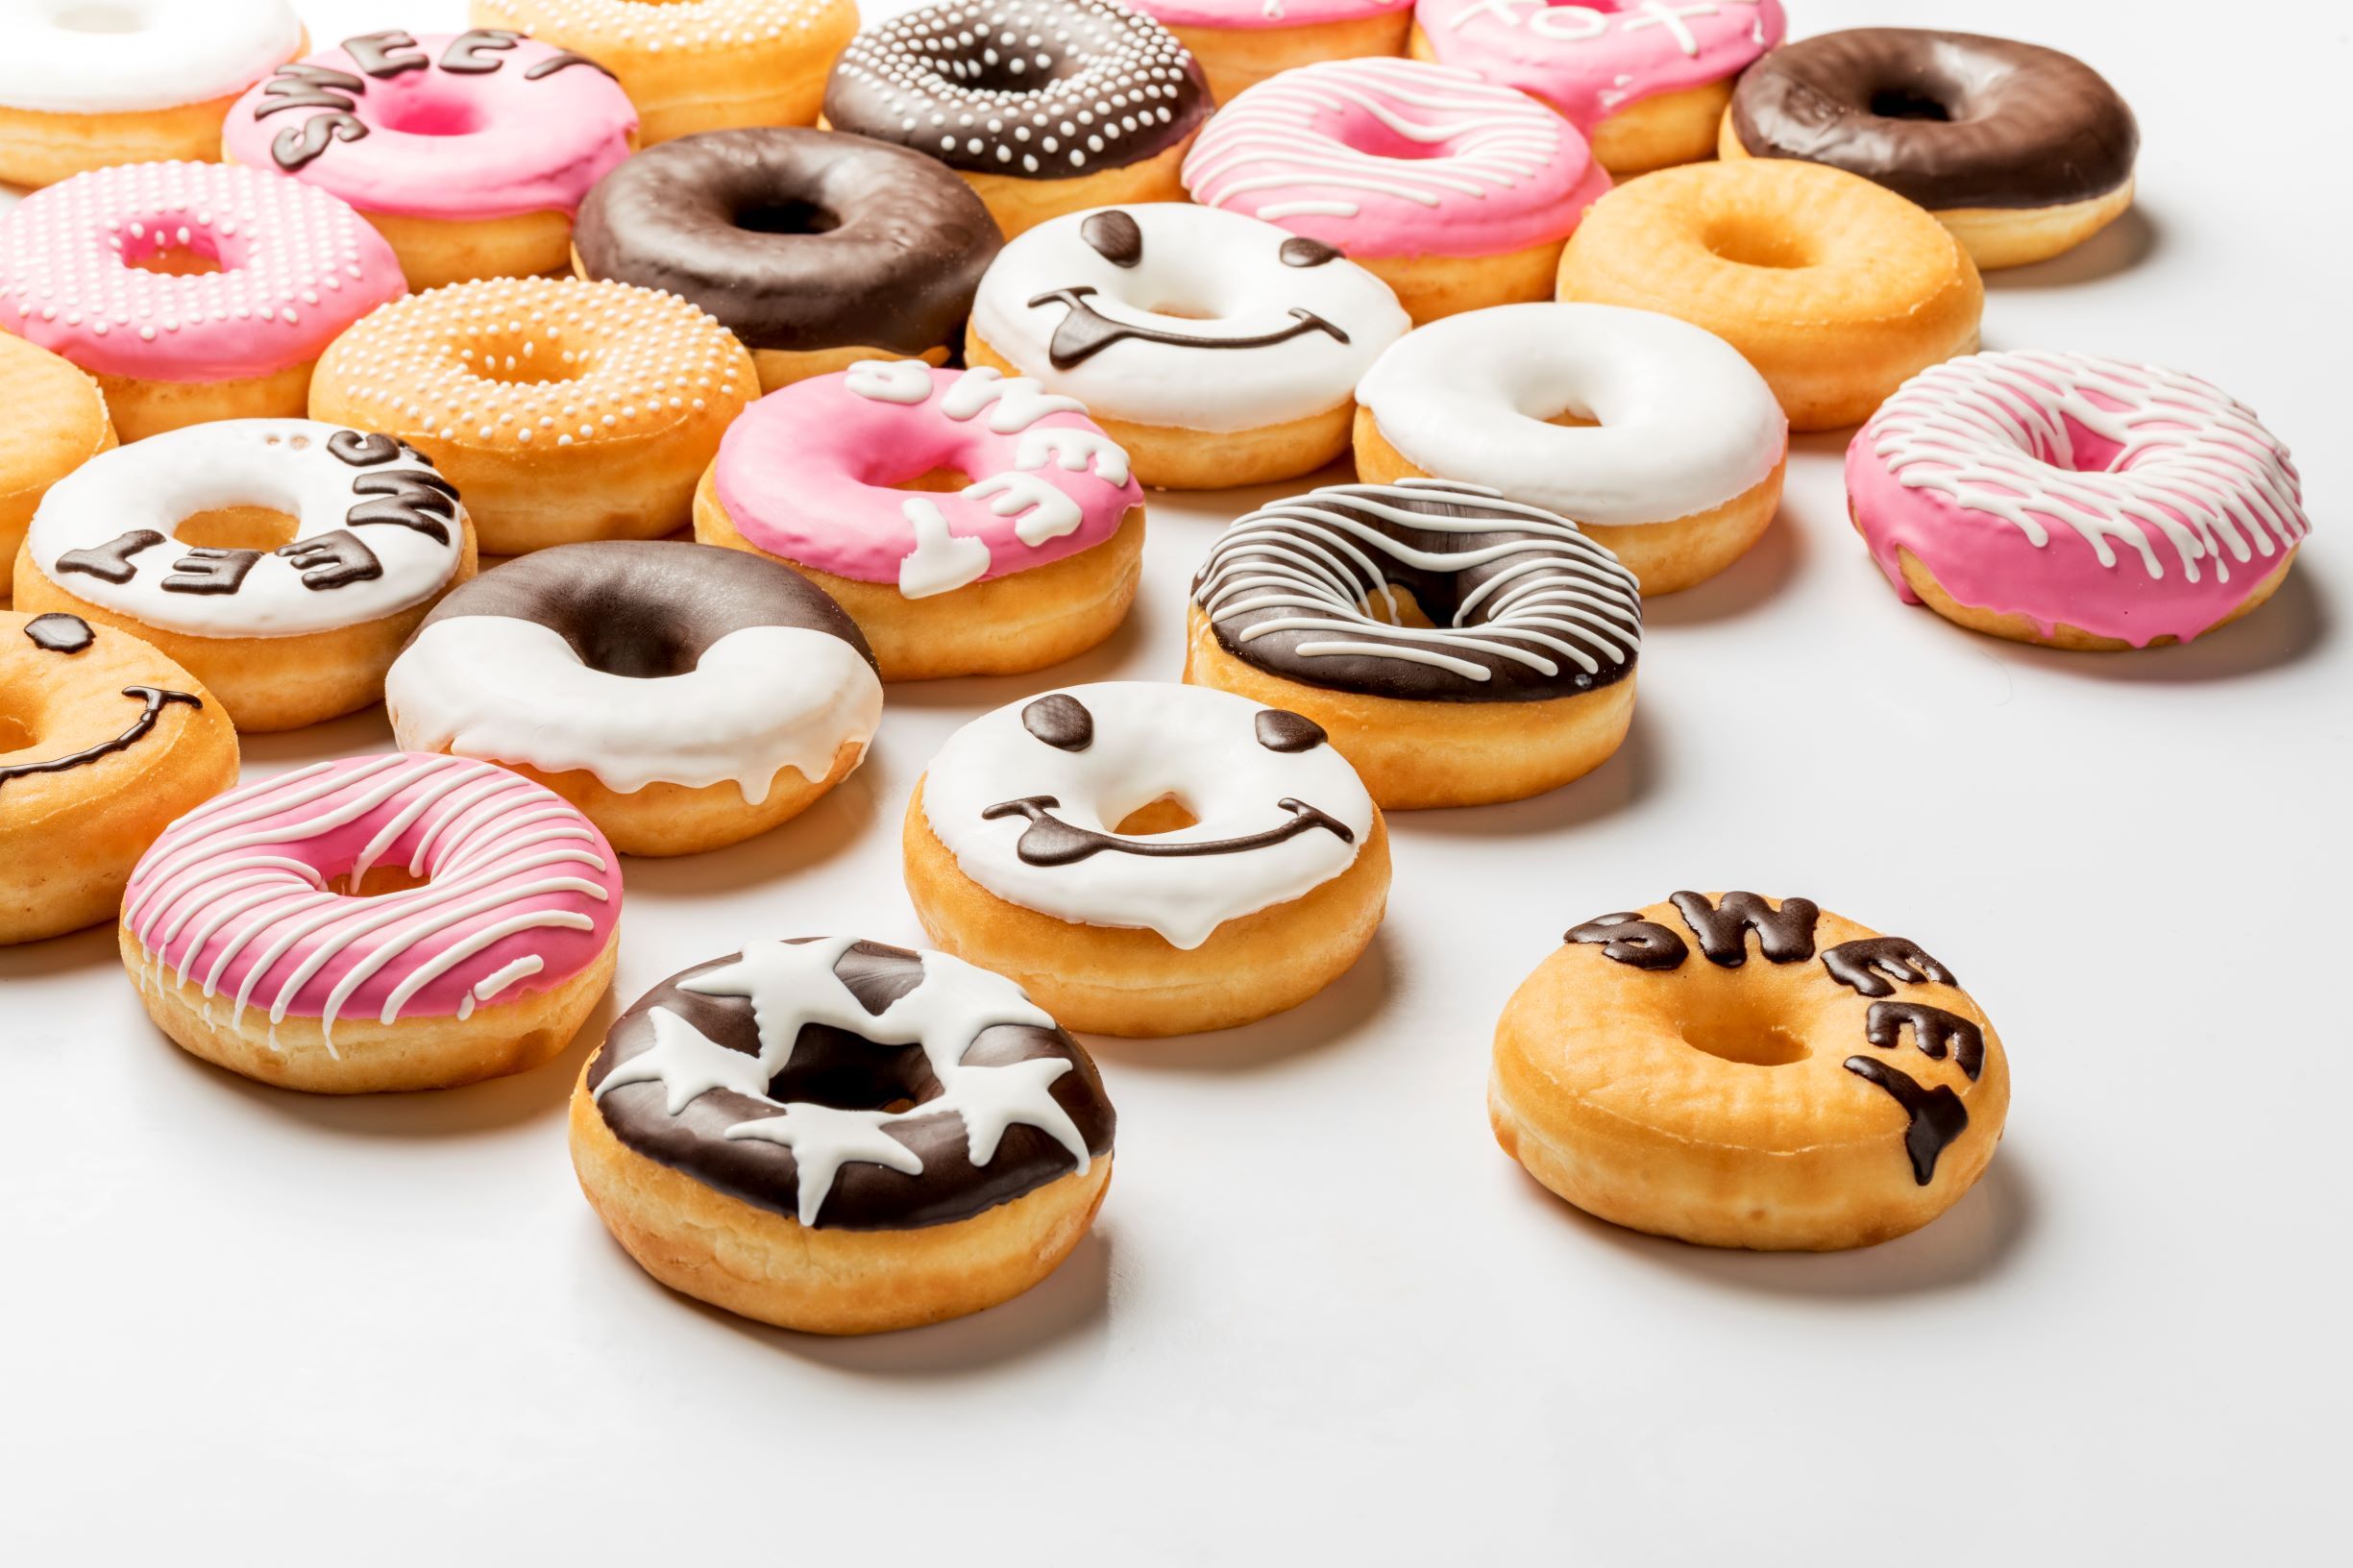 Wide range of chocolate decorated donuts made with FoodJet chocolate depositor